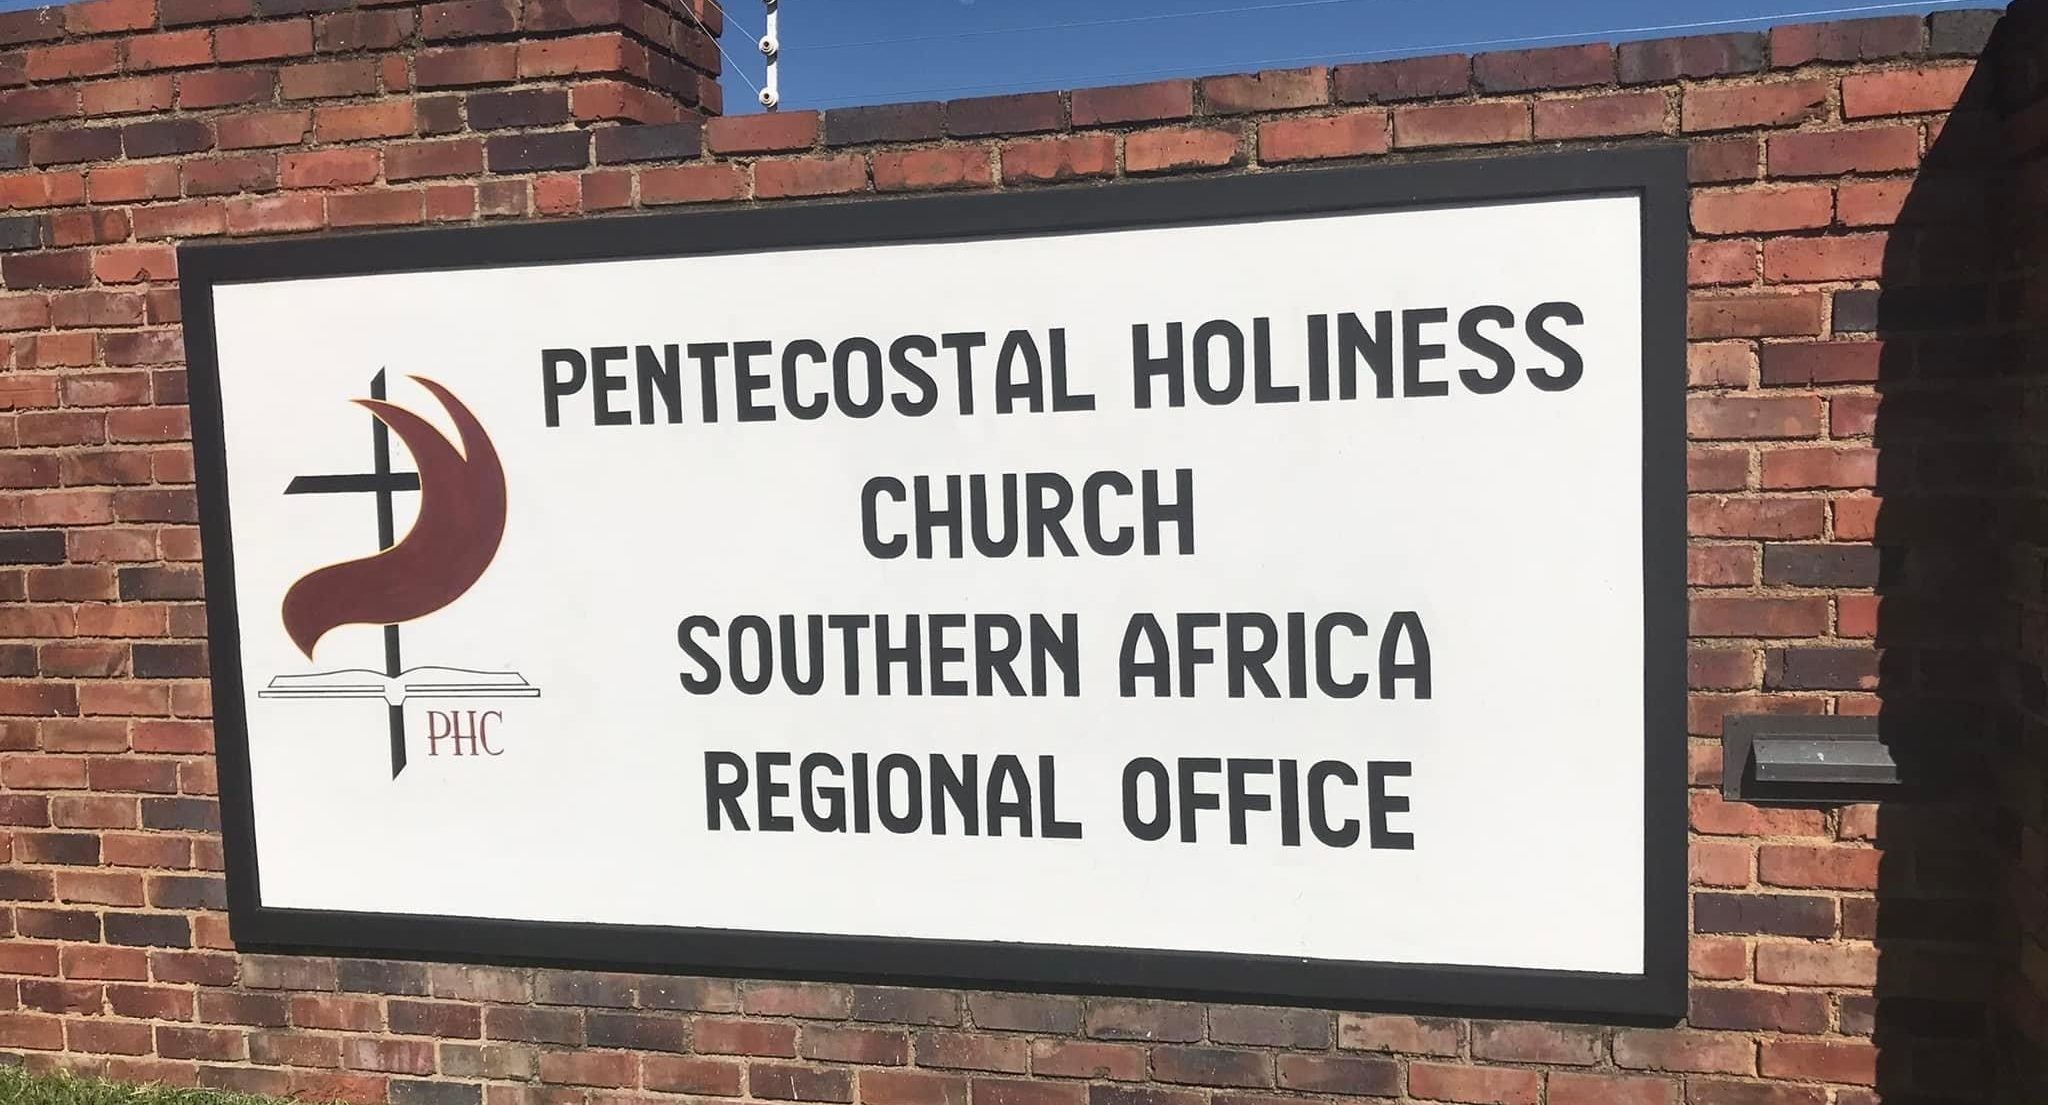 Southern Africa Regional Office Sign